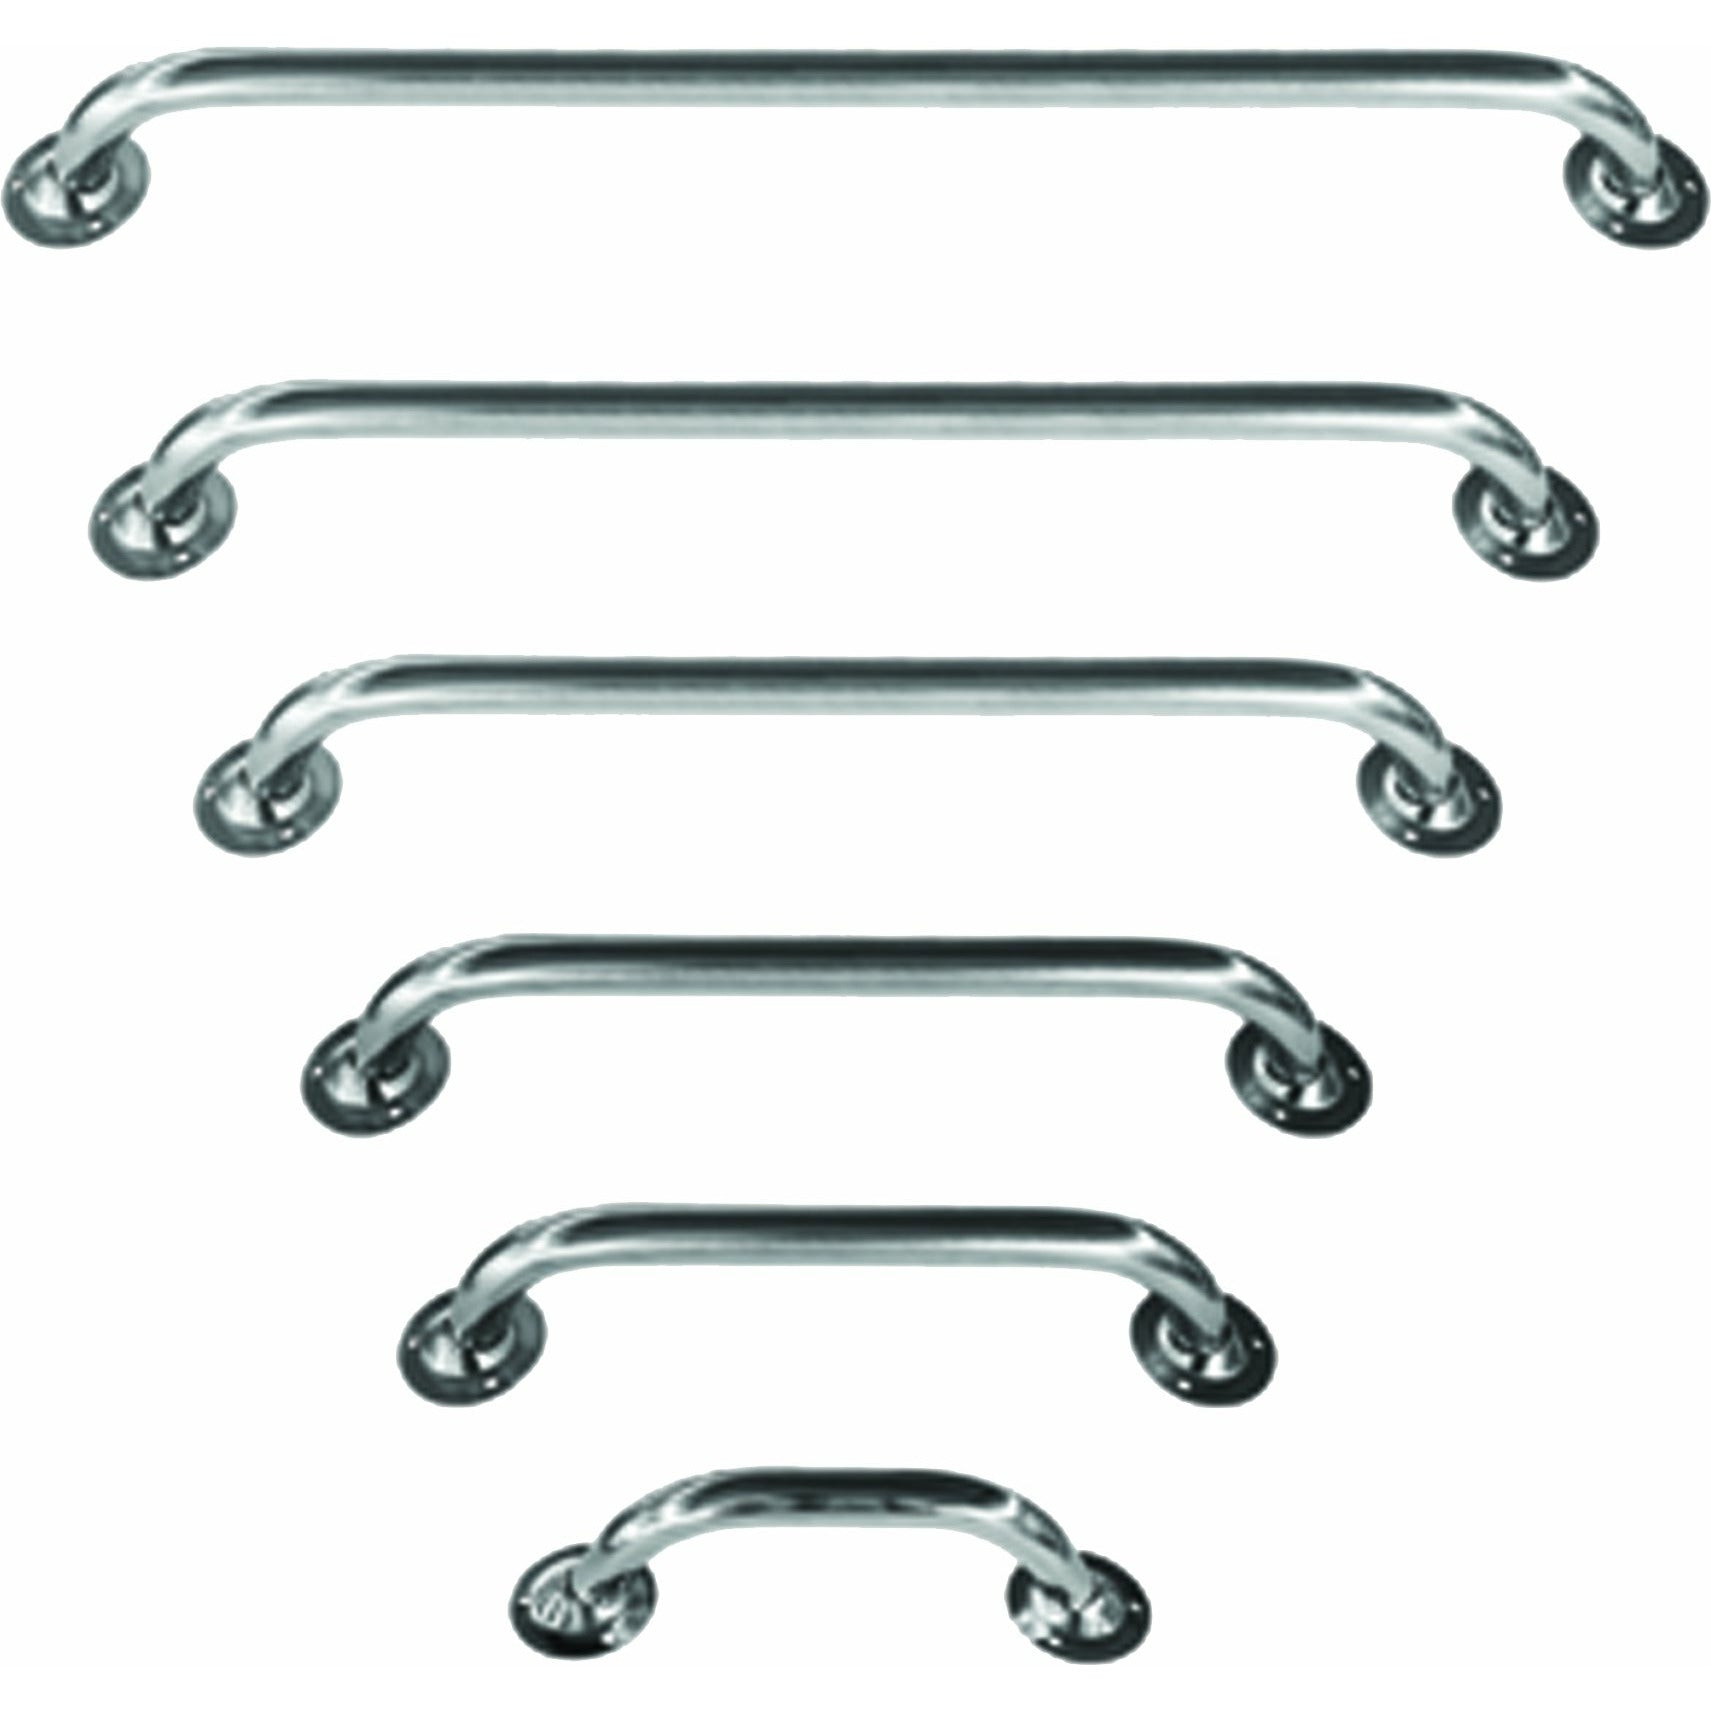 Talamex S.Steel Hand Rails With Bases 22X300 72135230